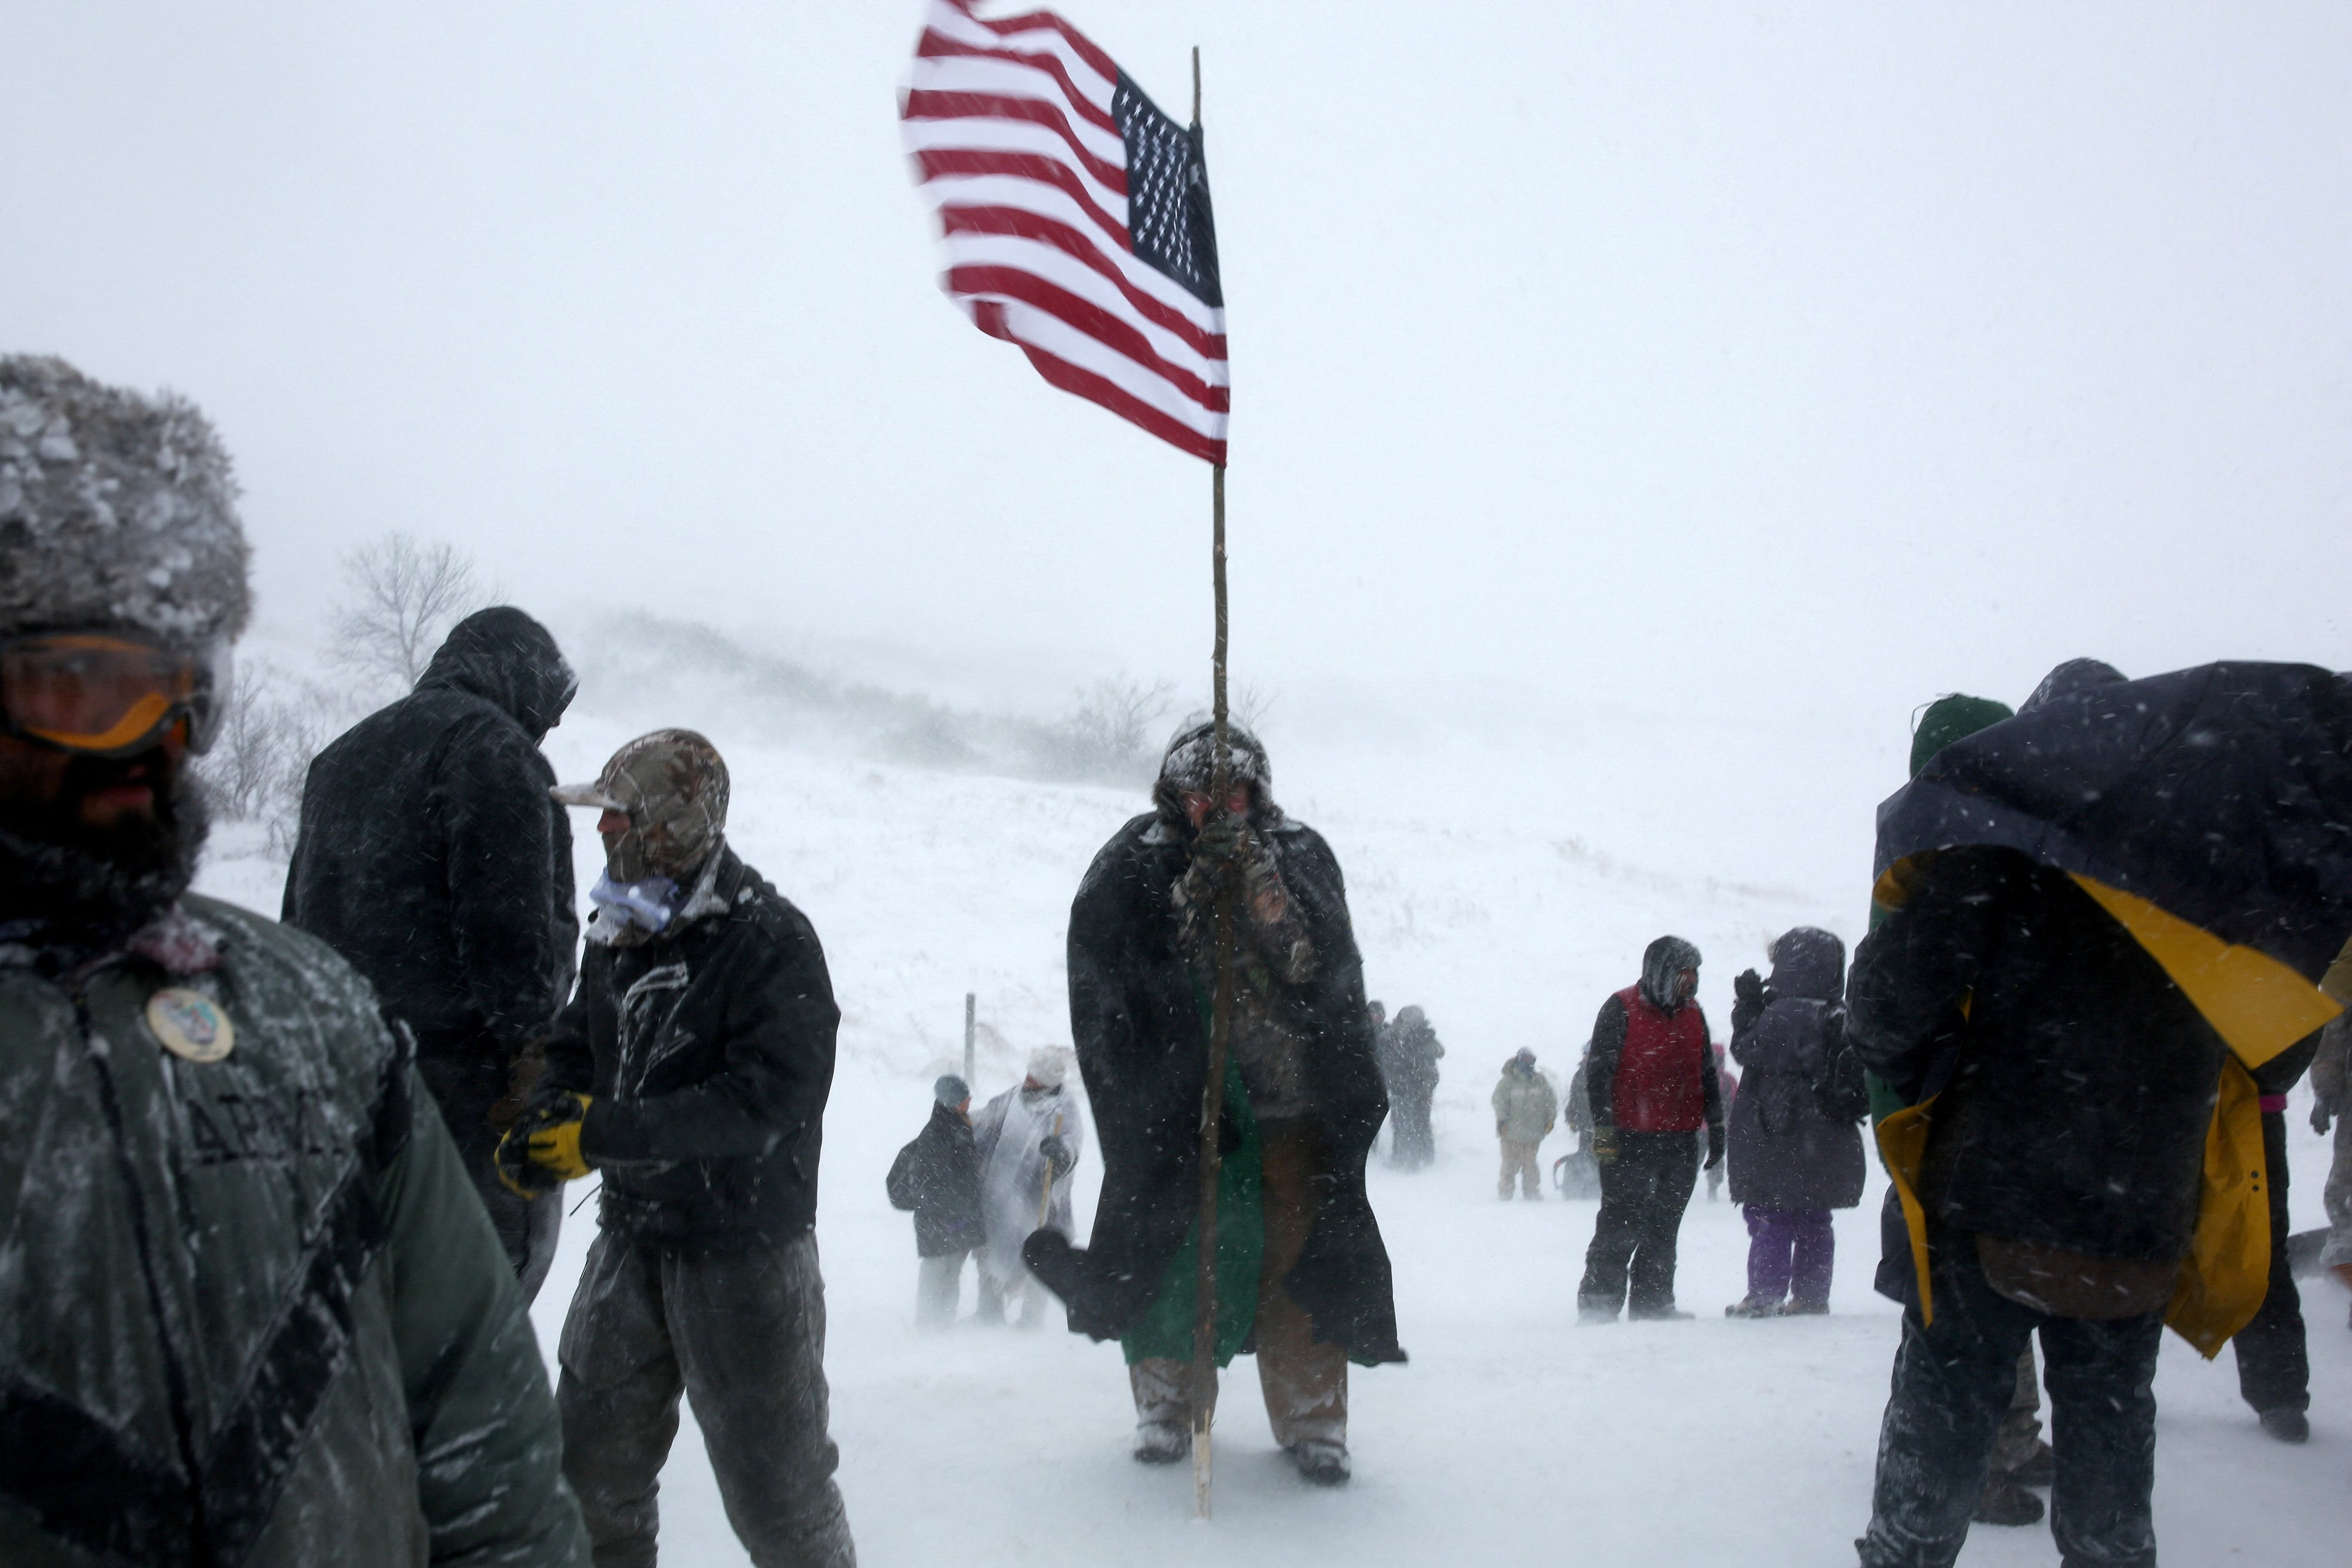 A man holds an American flag while protesting near Standing Rock Indian Reservation, North Dakota